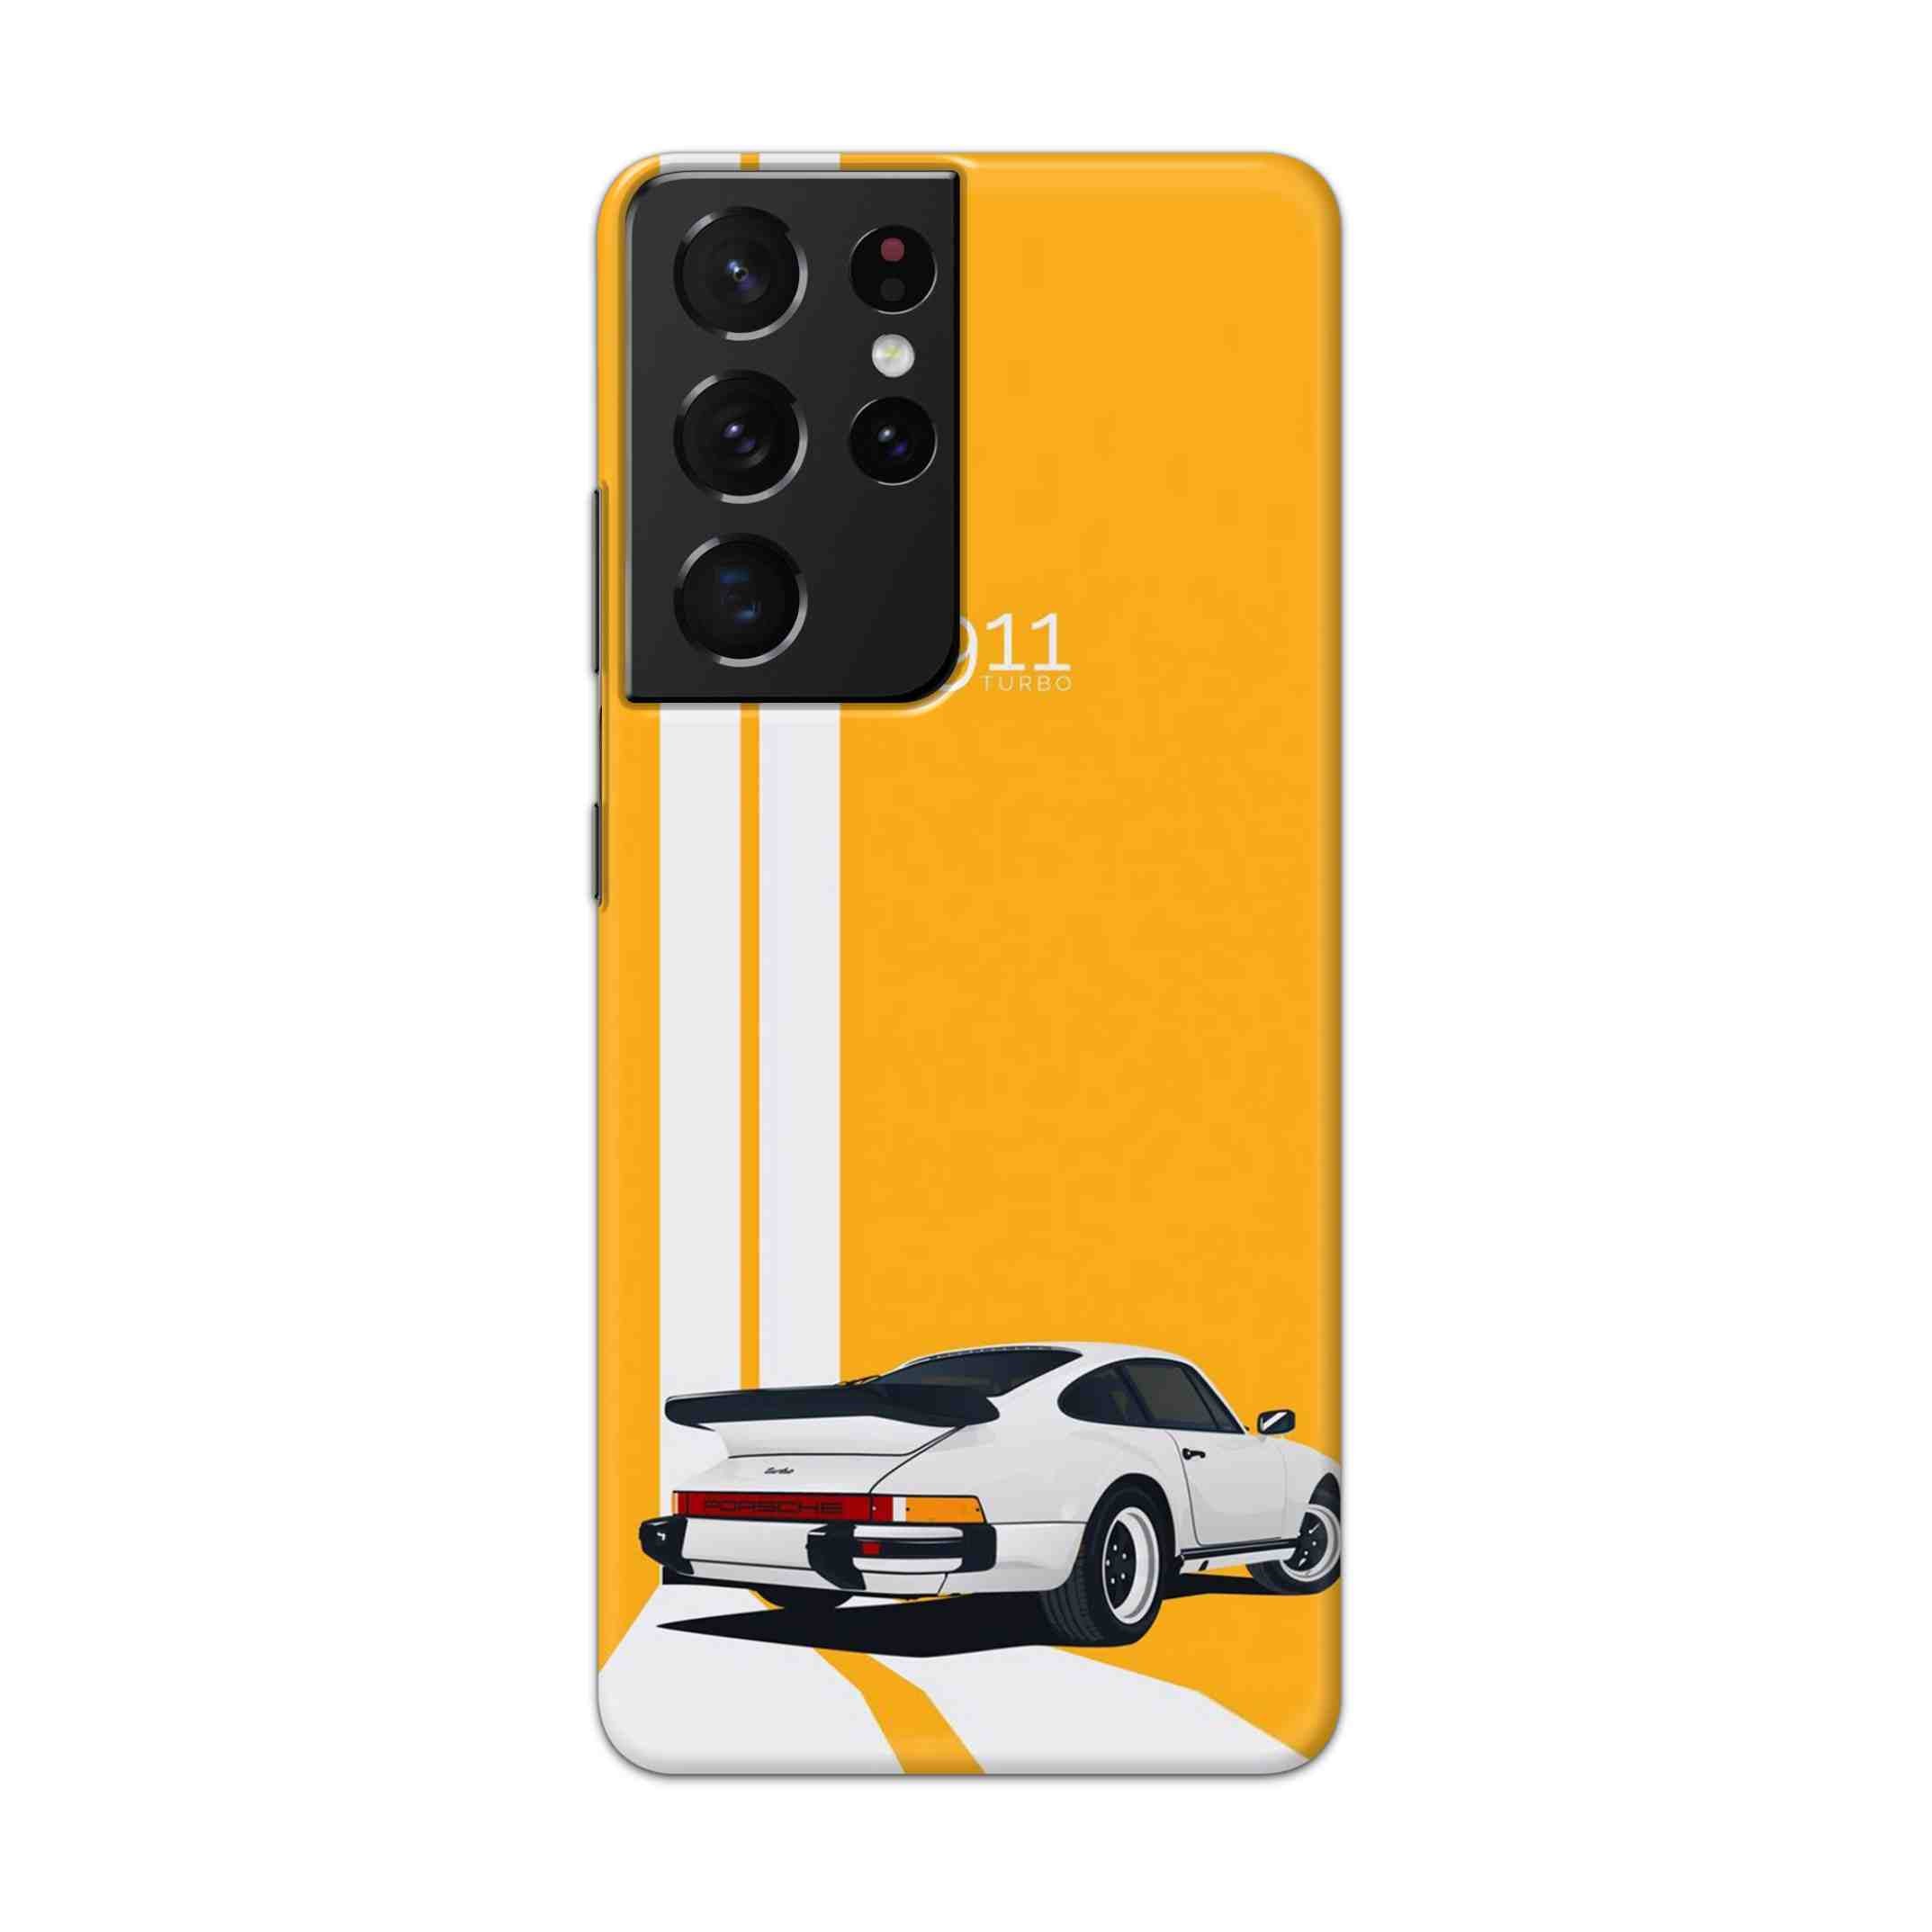 Buy 911 Gt Porche Hard Back Mobile Phone Case Cover For Samsung Galaxy S21 Ultra Online